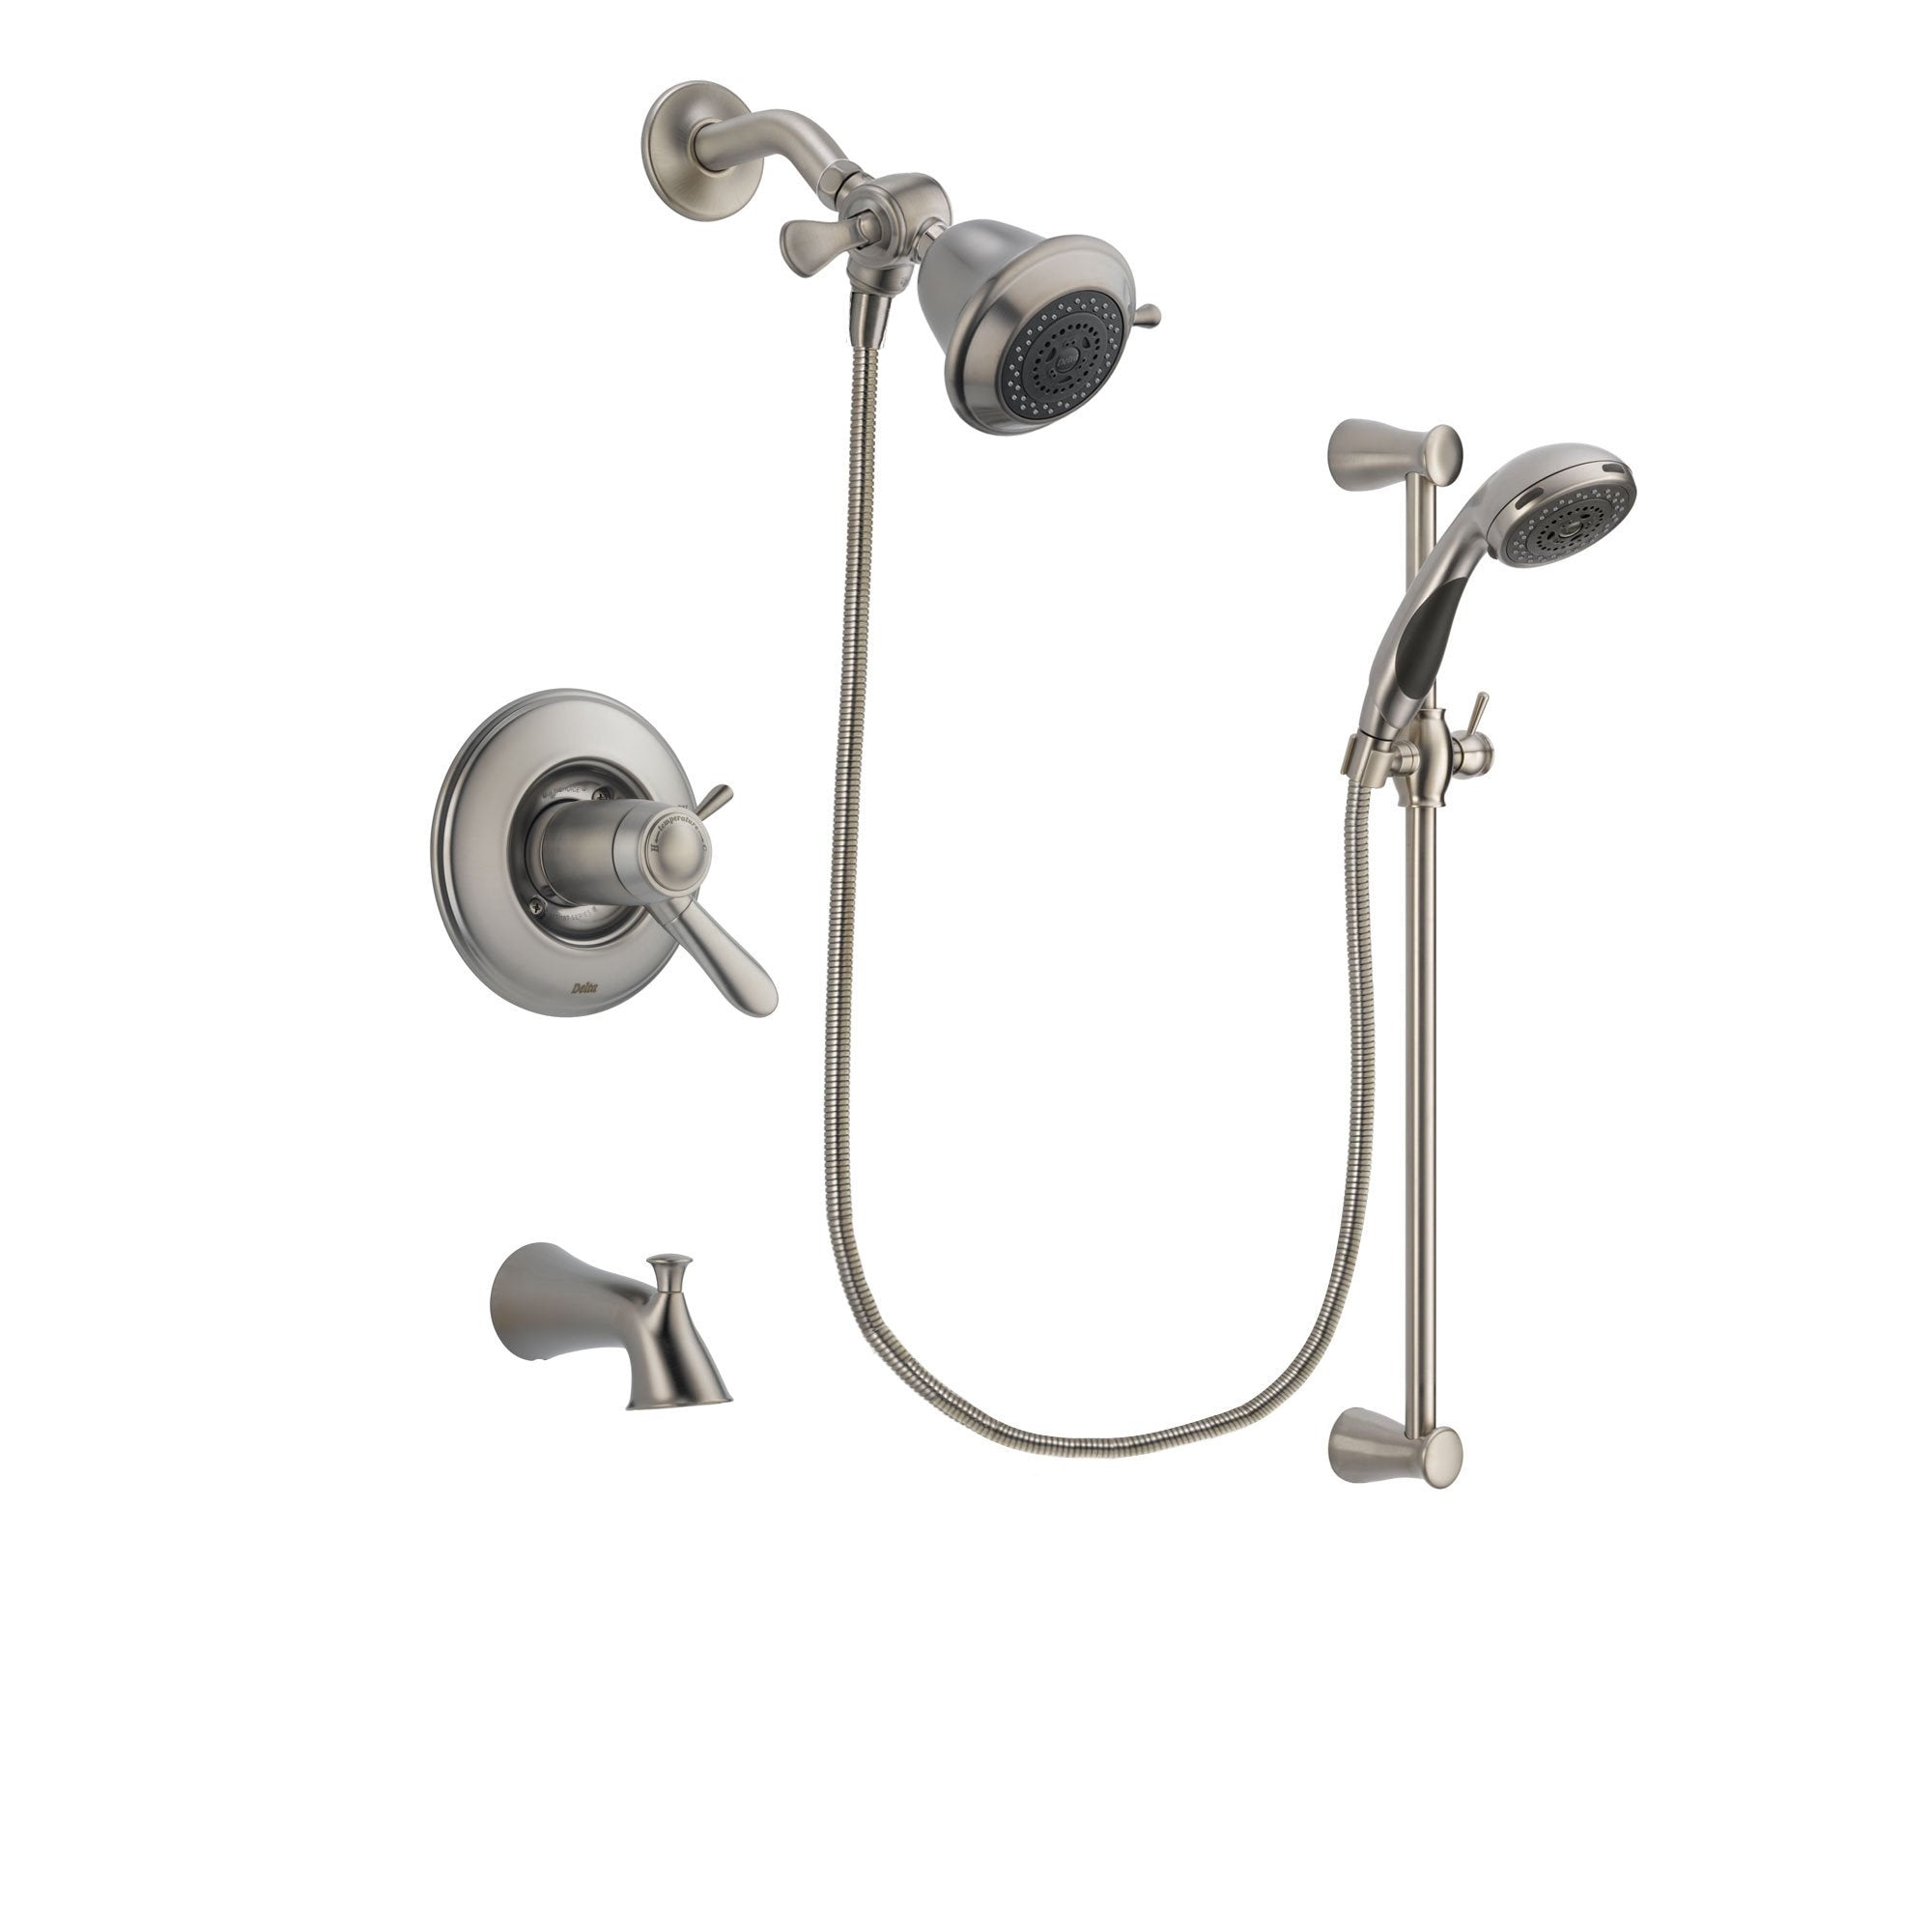 Delta Lahara Stainless Steel Finish Thermostatic Tub and Shower Faucet System Package with Shower Head and Handheld Shower Spray with Slide Bar Includes Rough-in Valve and Tub Spout DSP1513V